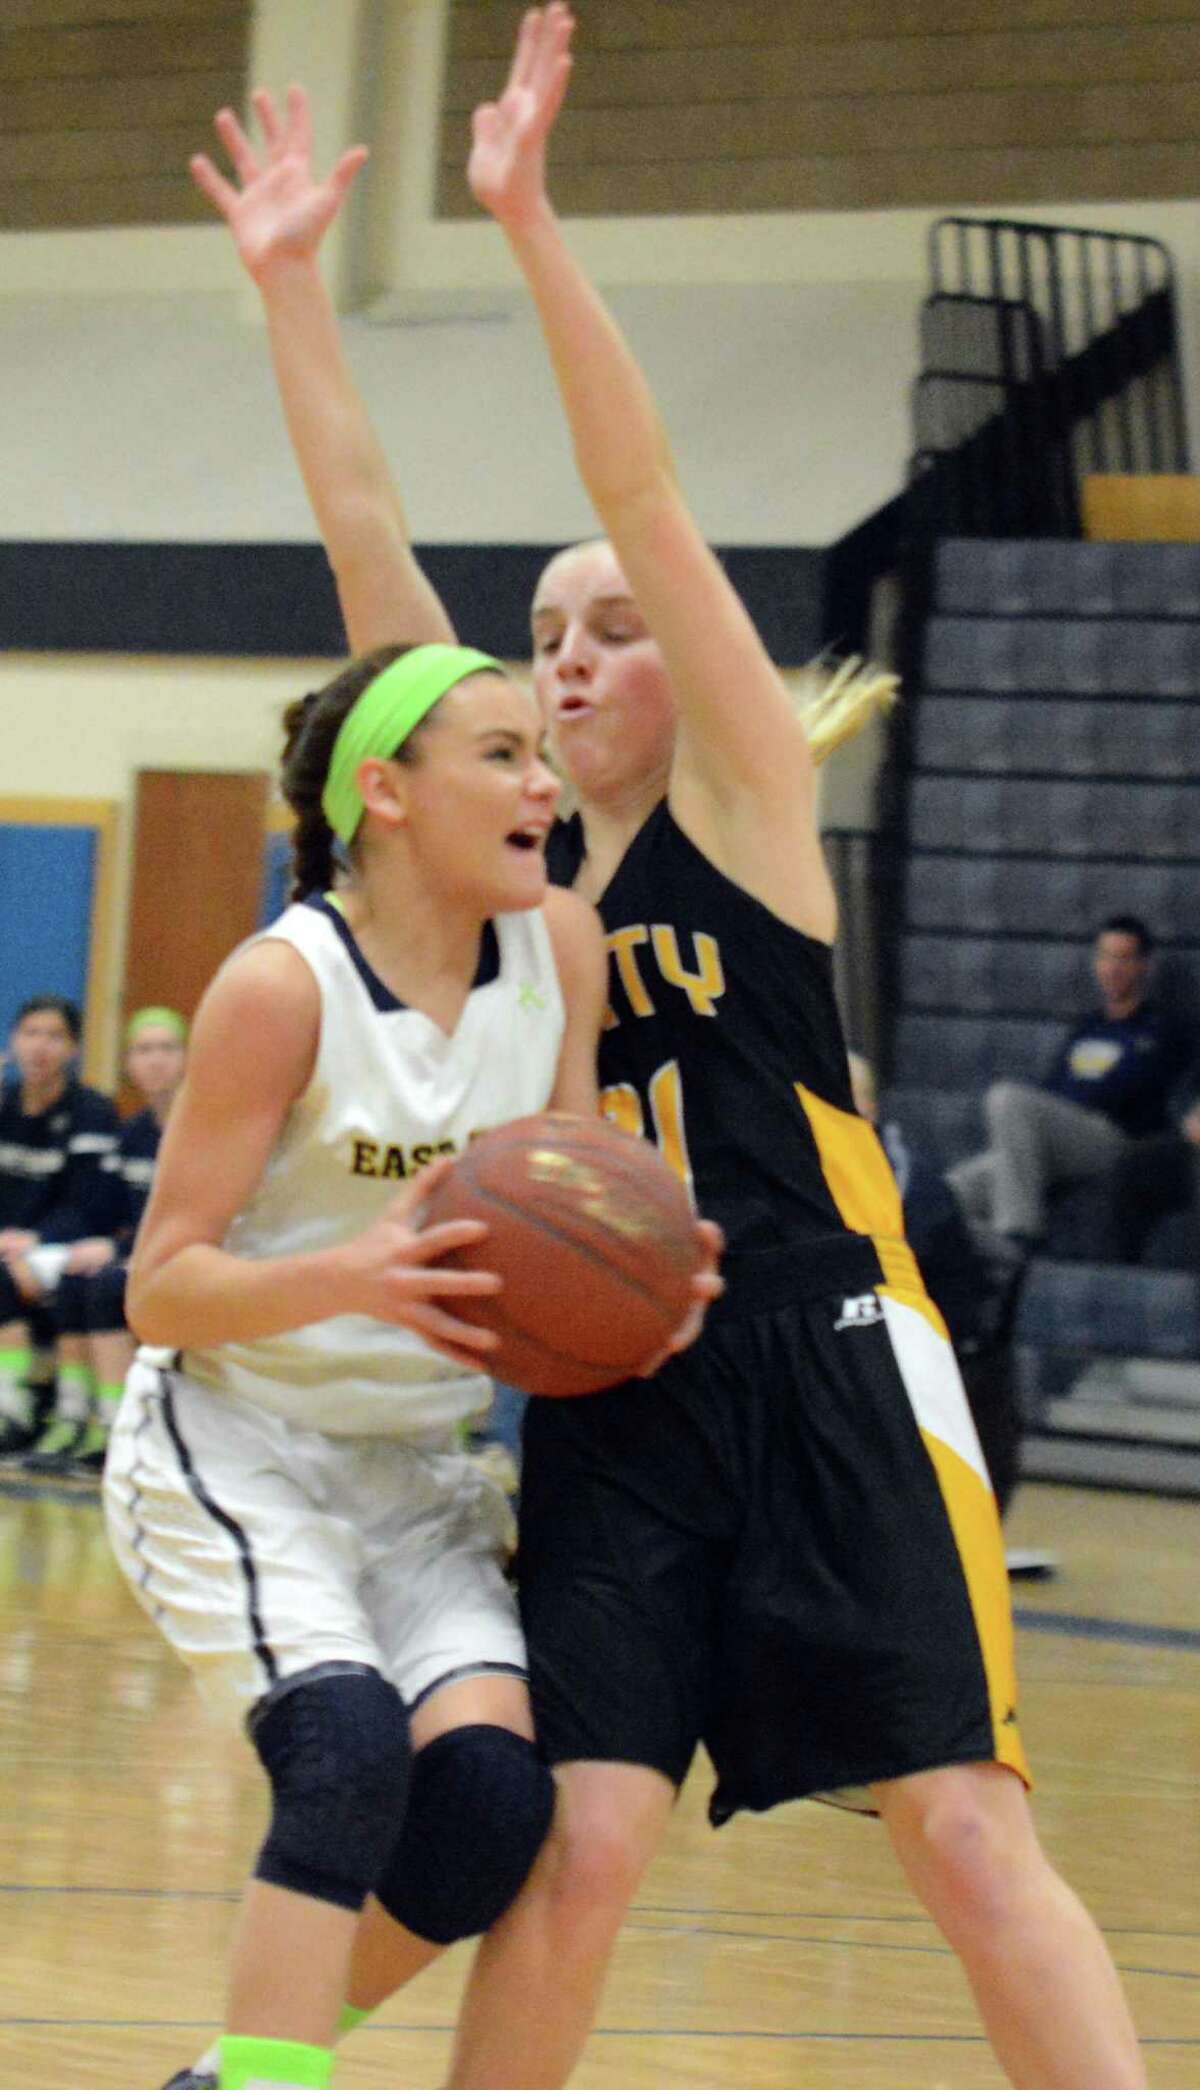 Amity’s Emma Gehr defends East Haven’s Cailey Korwek during the first round of the SCC tournament at East Haven (Photo by Dave Phillips)